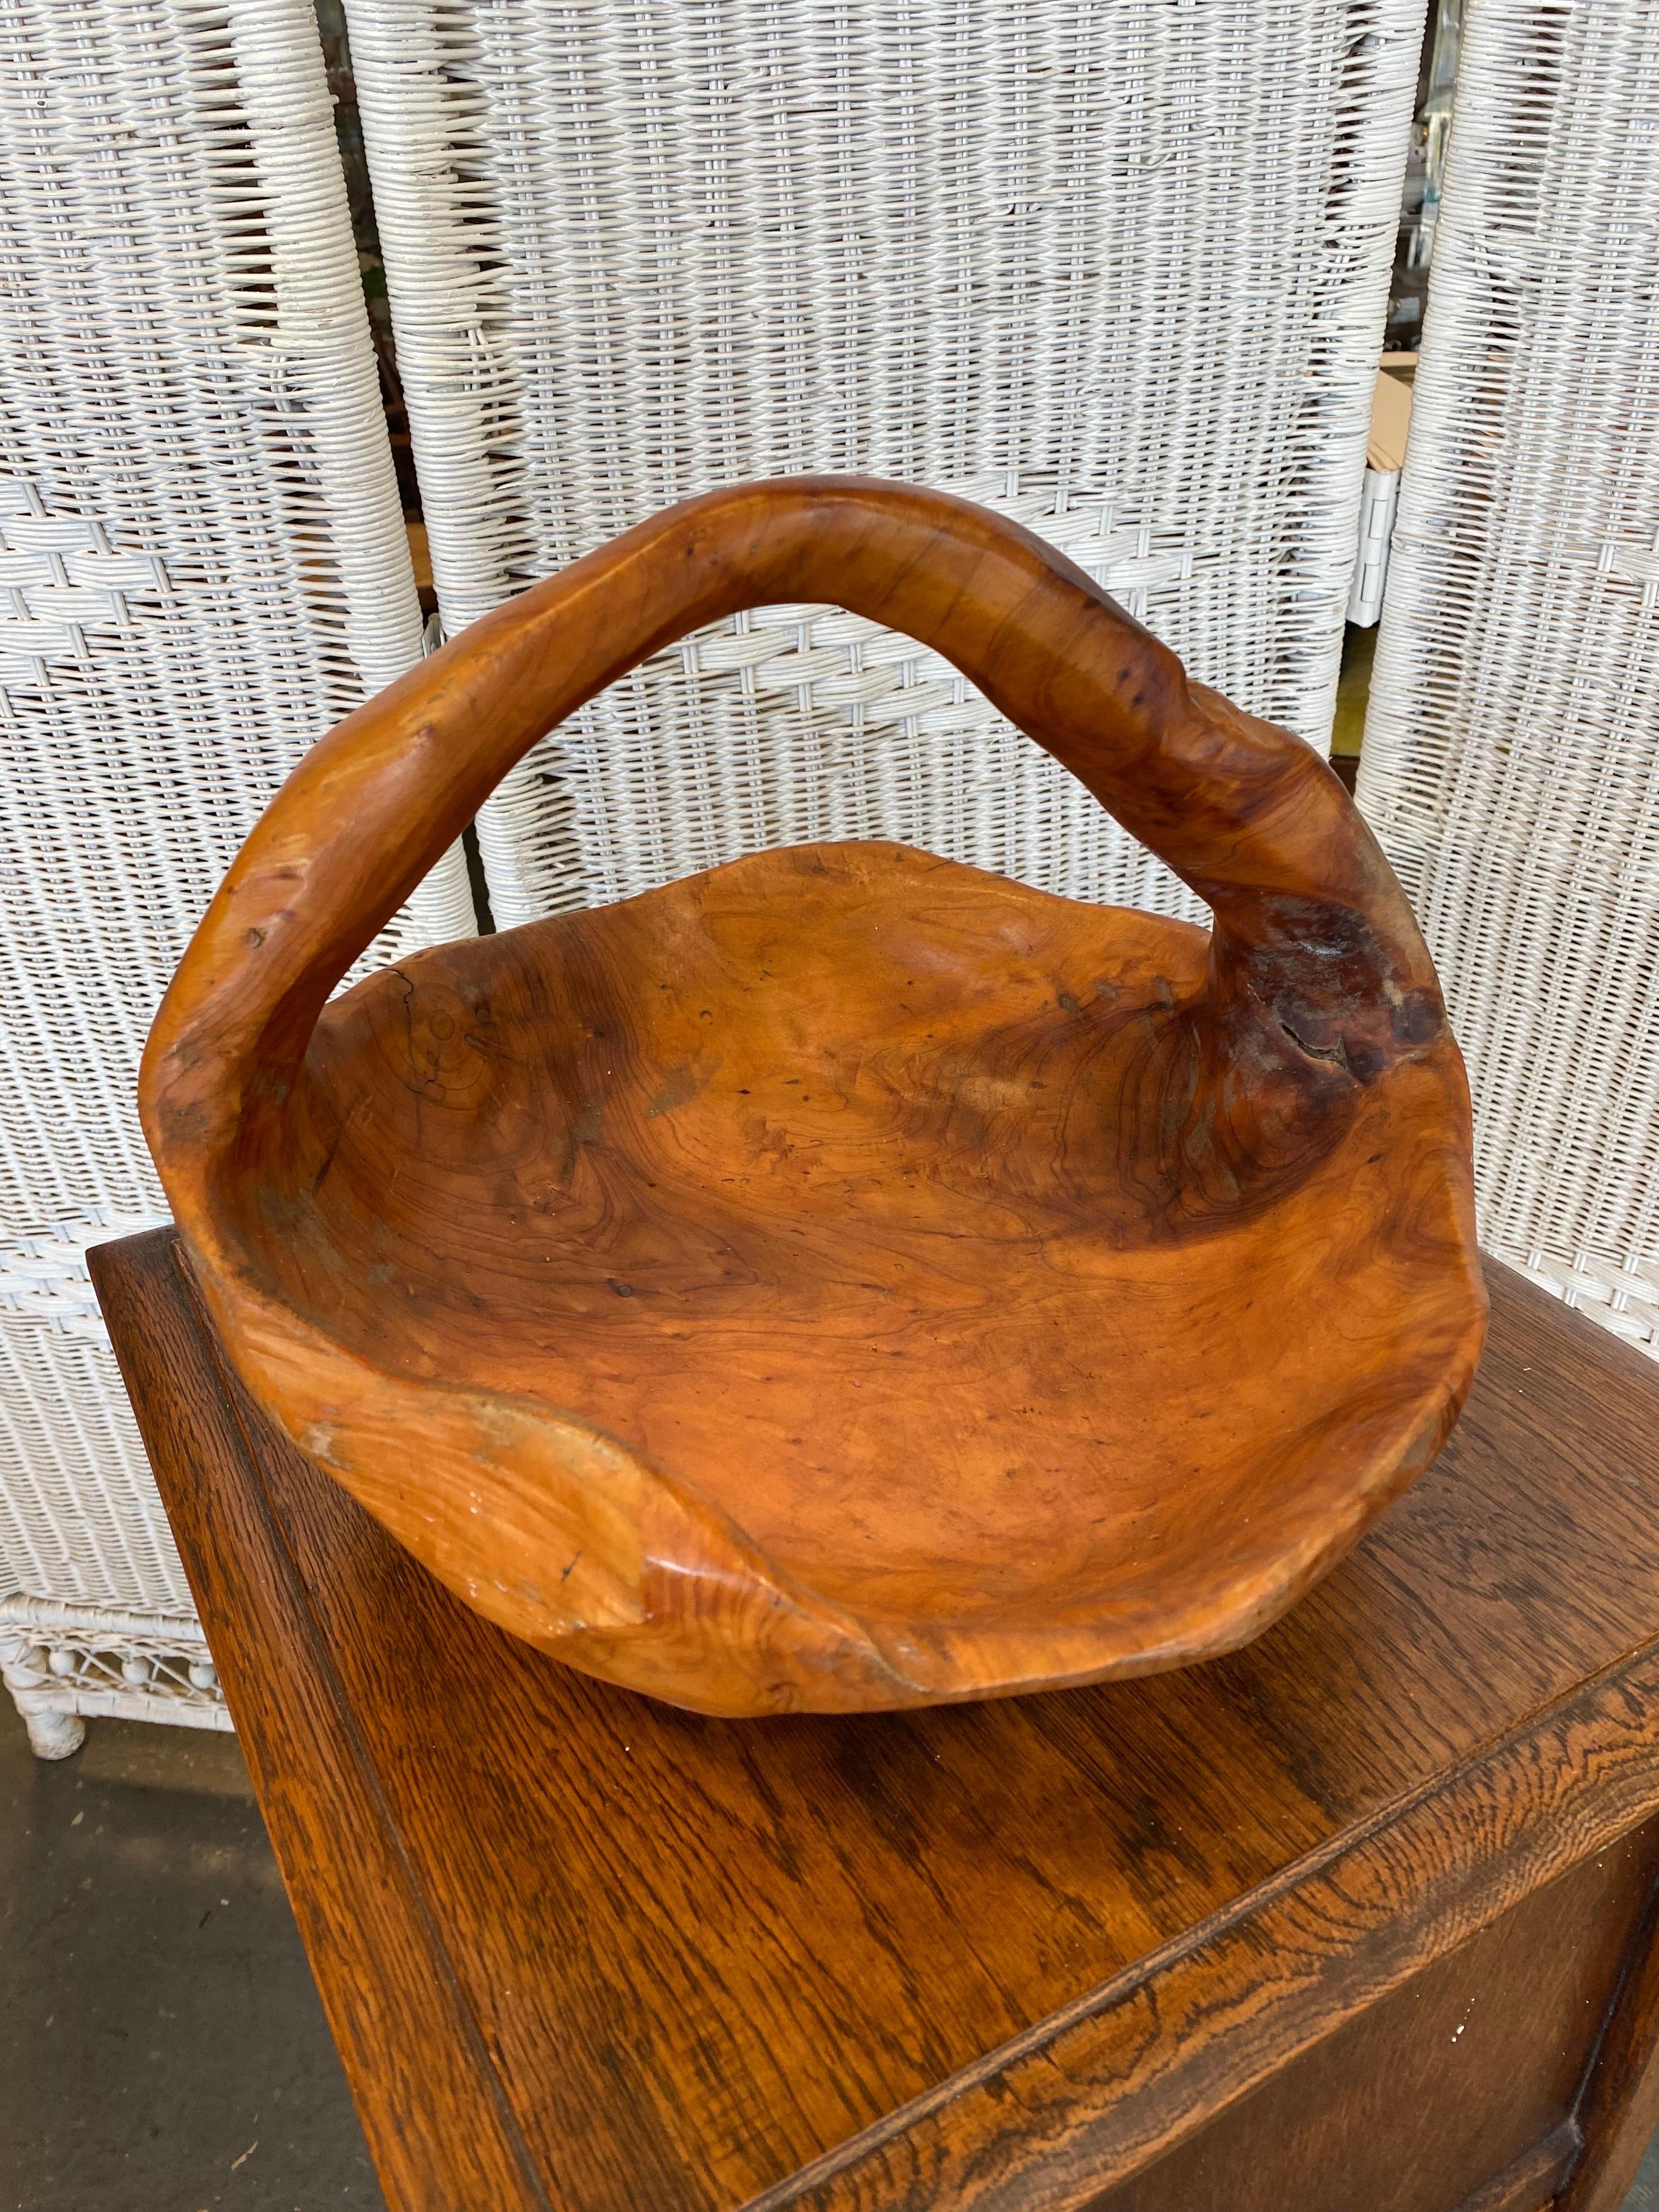 Beautiful bowl or basket carved out of redwood burl. An excellent piece to display your fruit or just use it as a decor piece on its own.